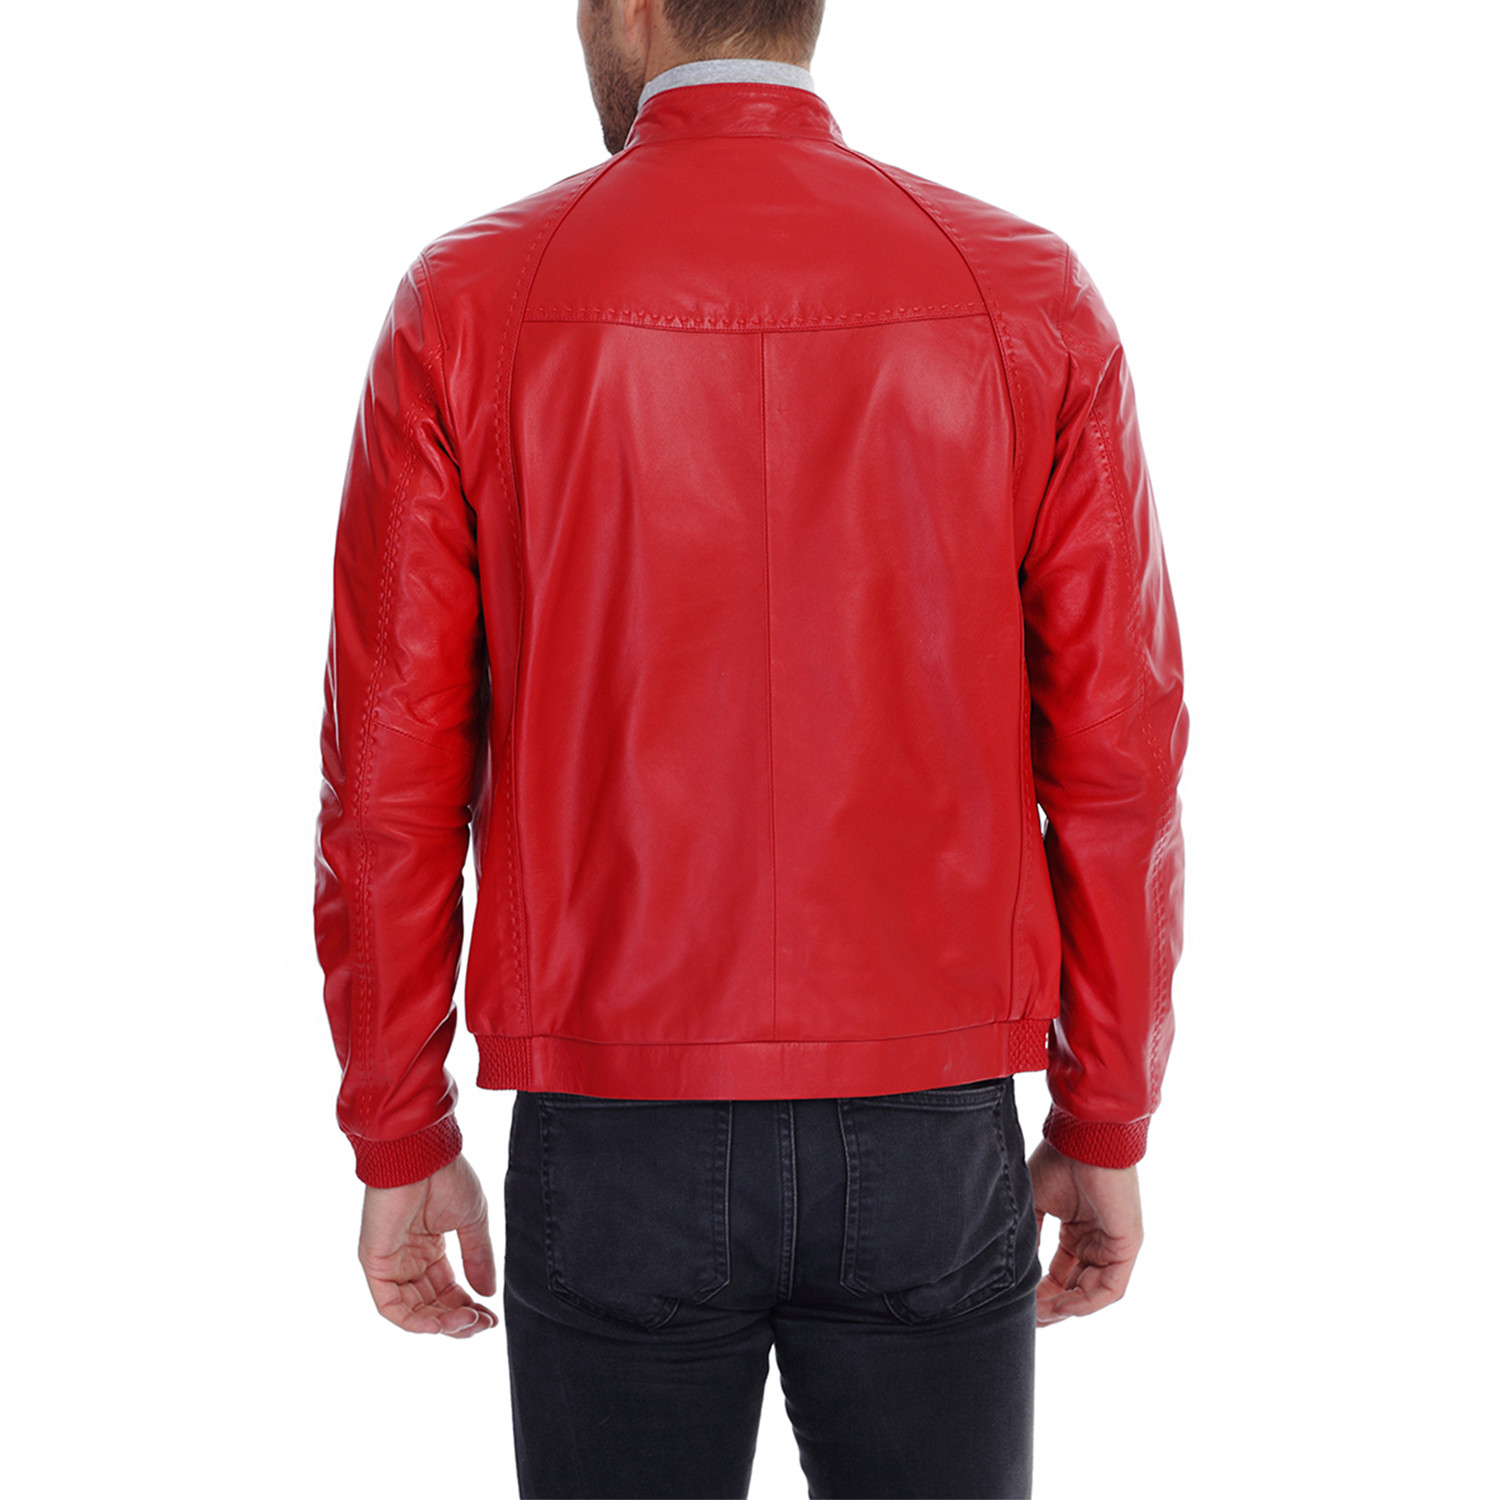 Rex Leather Jacket // Red (M) - Outerwear Clearance - Touch of Modern